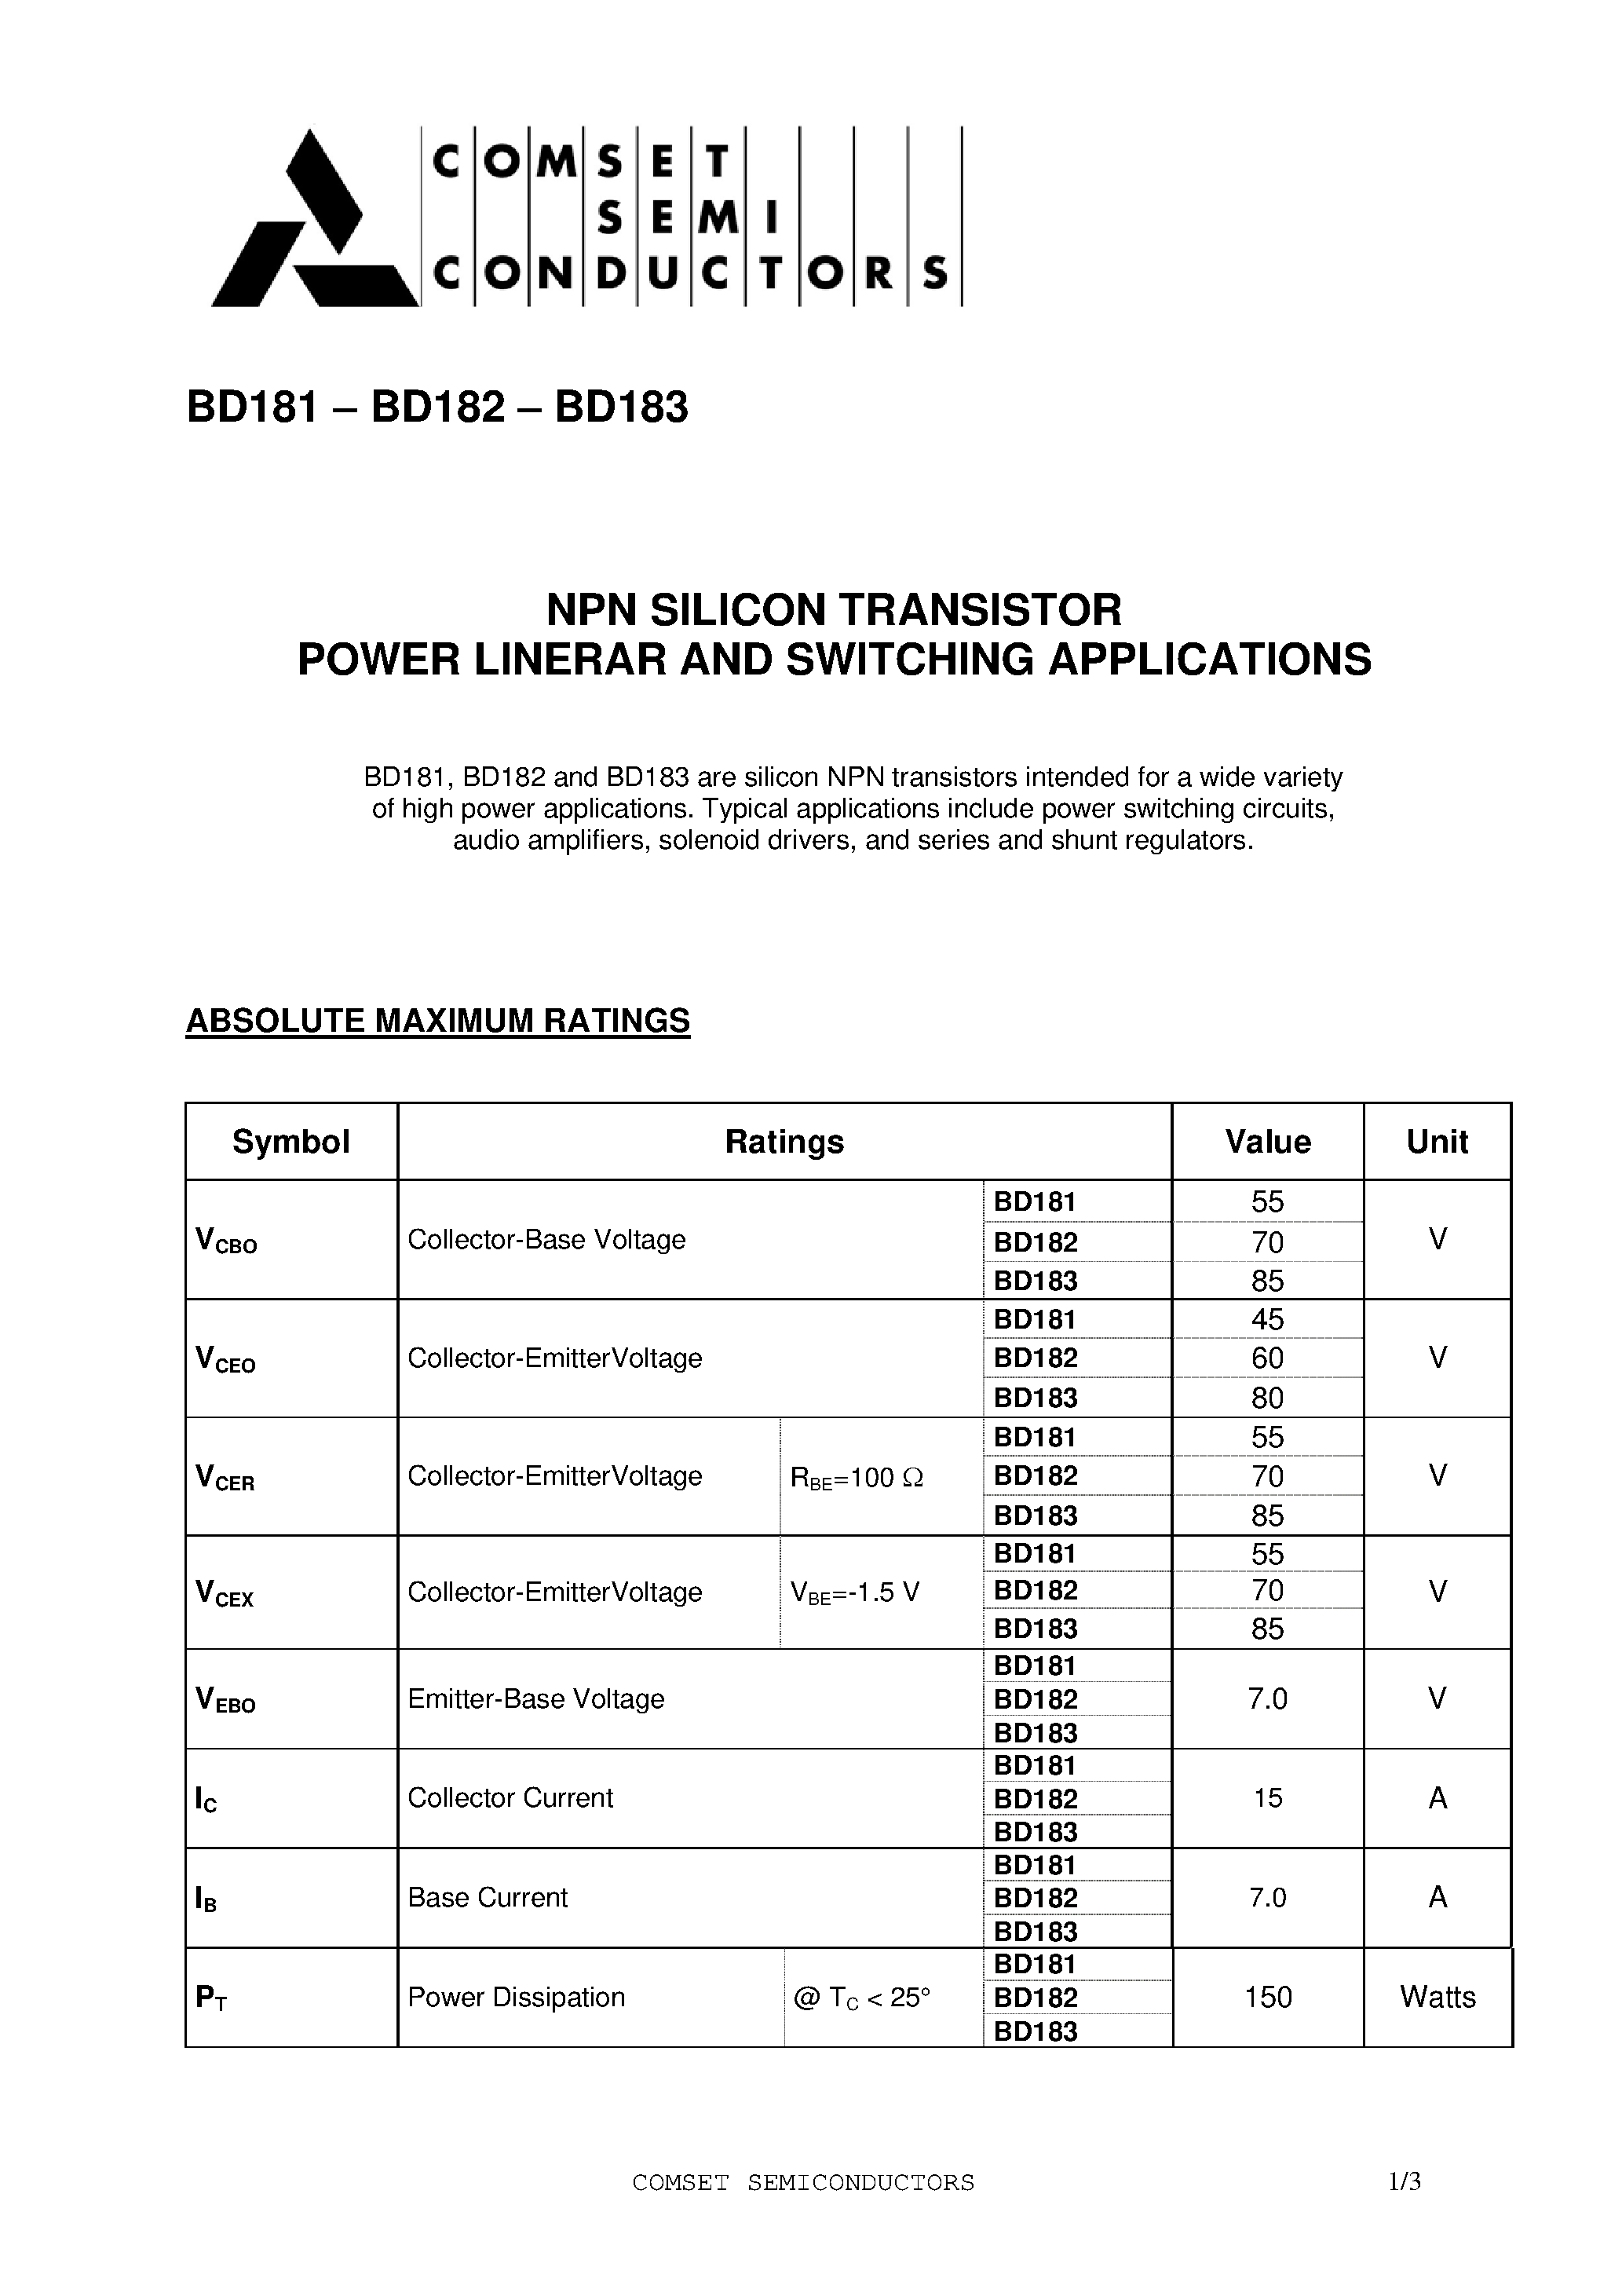 Datasheet BD181 - (BD181 - BD183) NPN Silicon Transistor / Power Liner and Switching Applications page 1